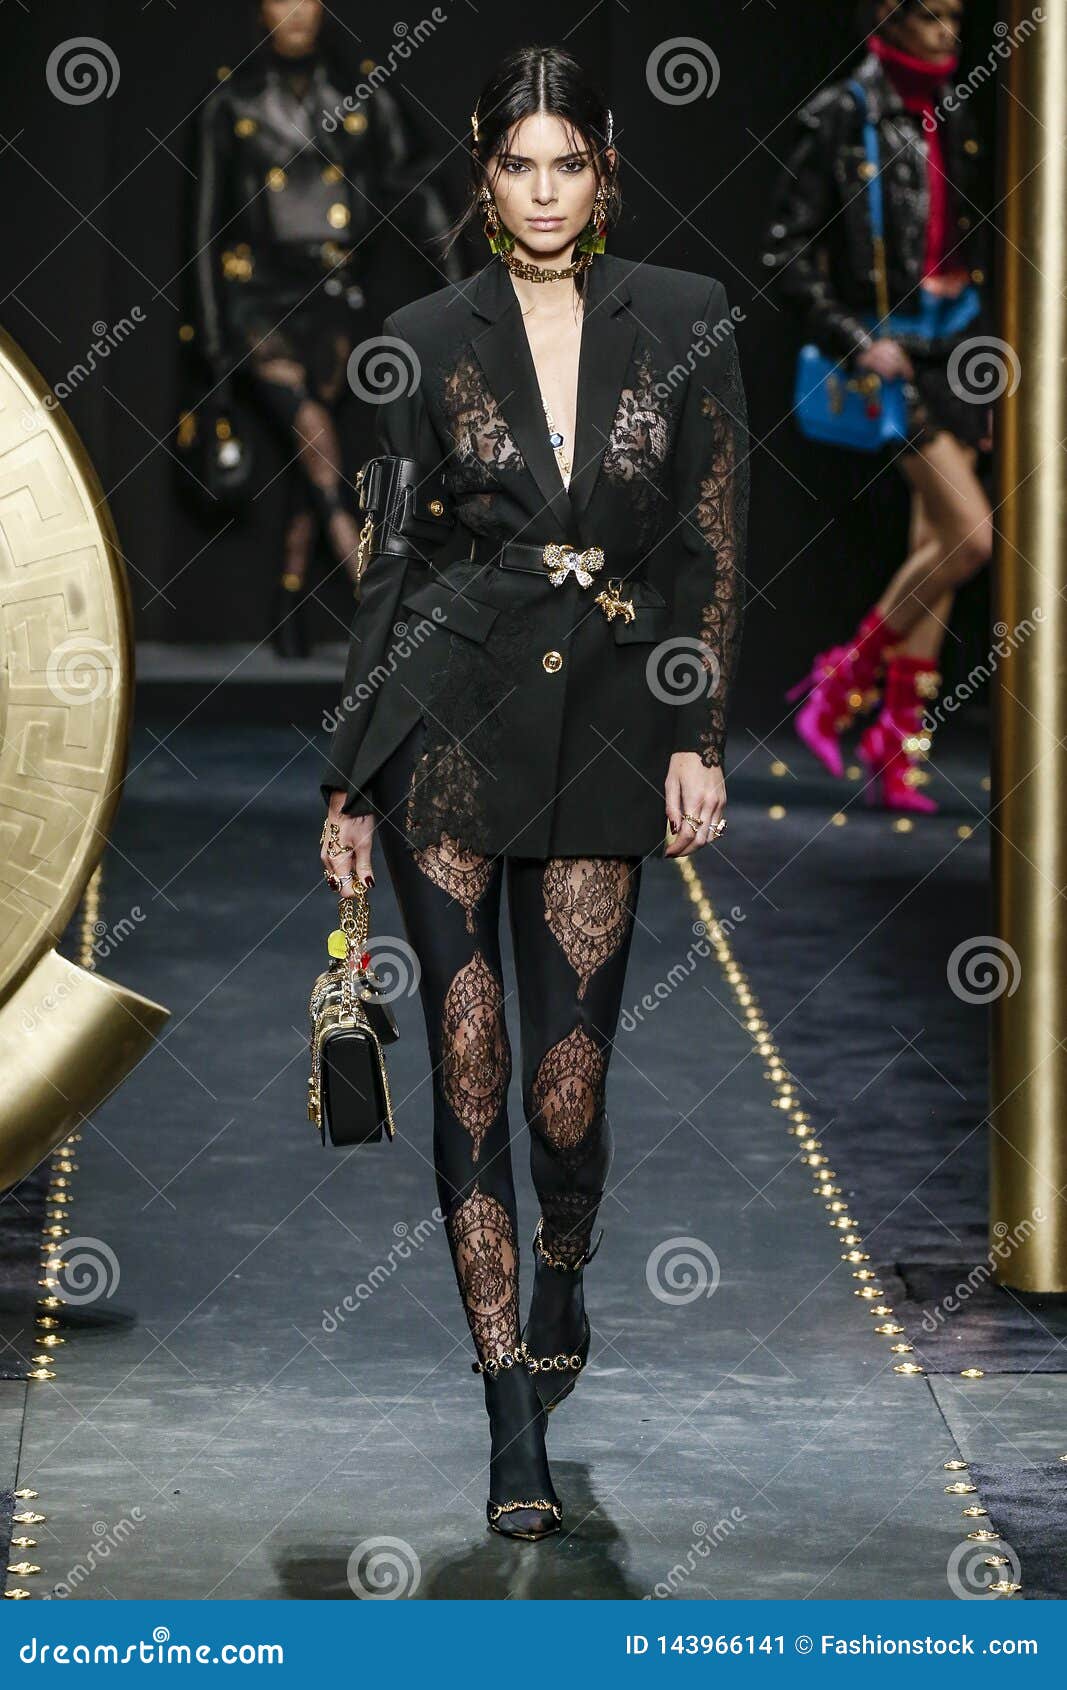 Kendall Jenner walks the runway at the Versace Ready to Wear fashion